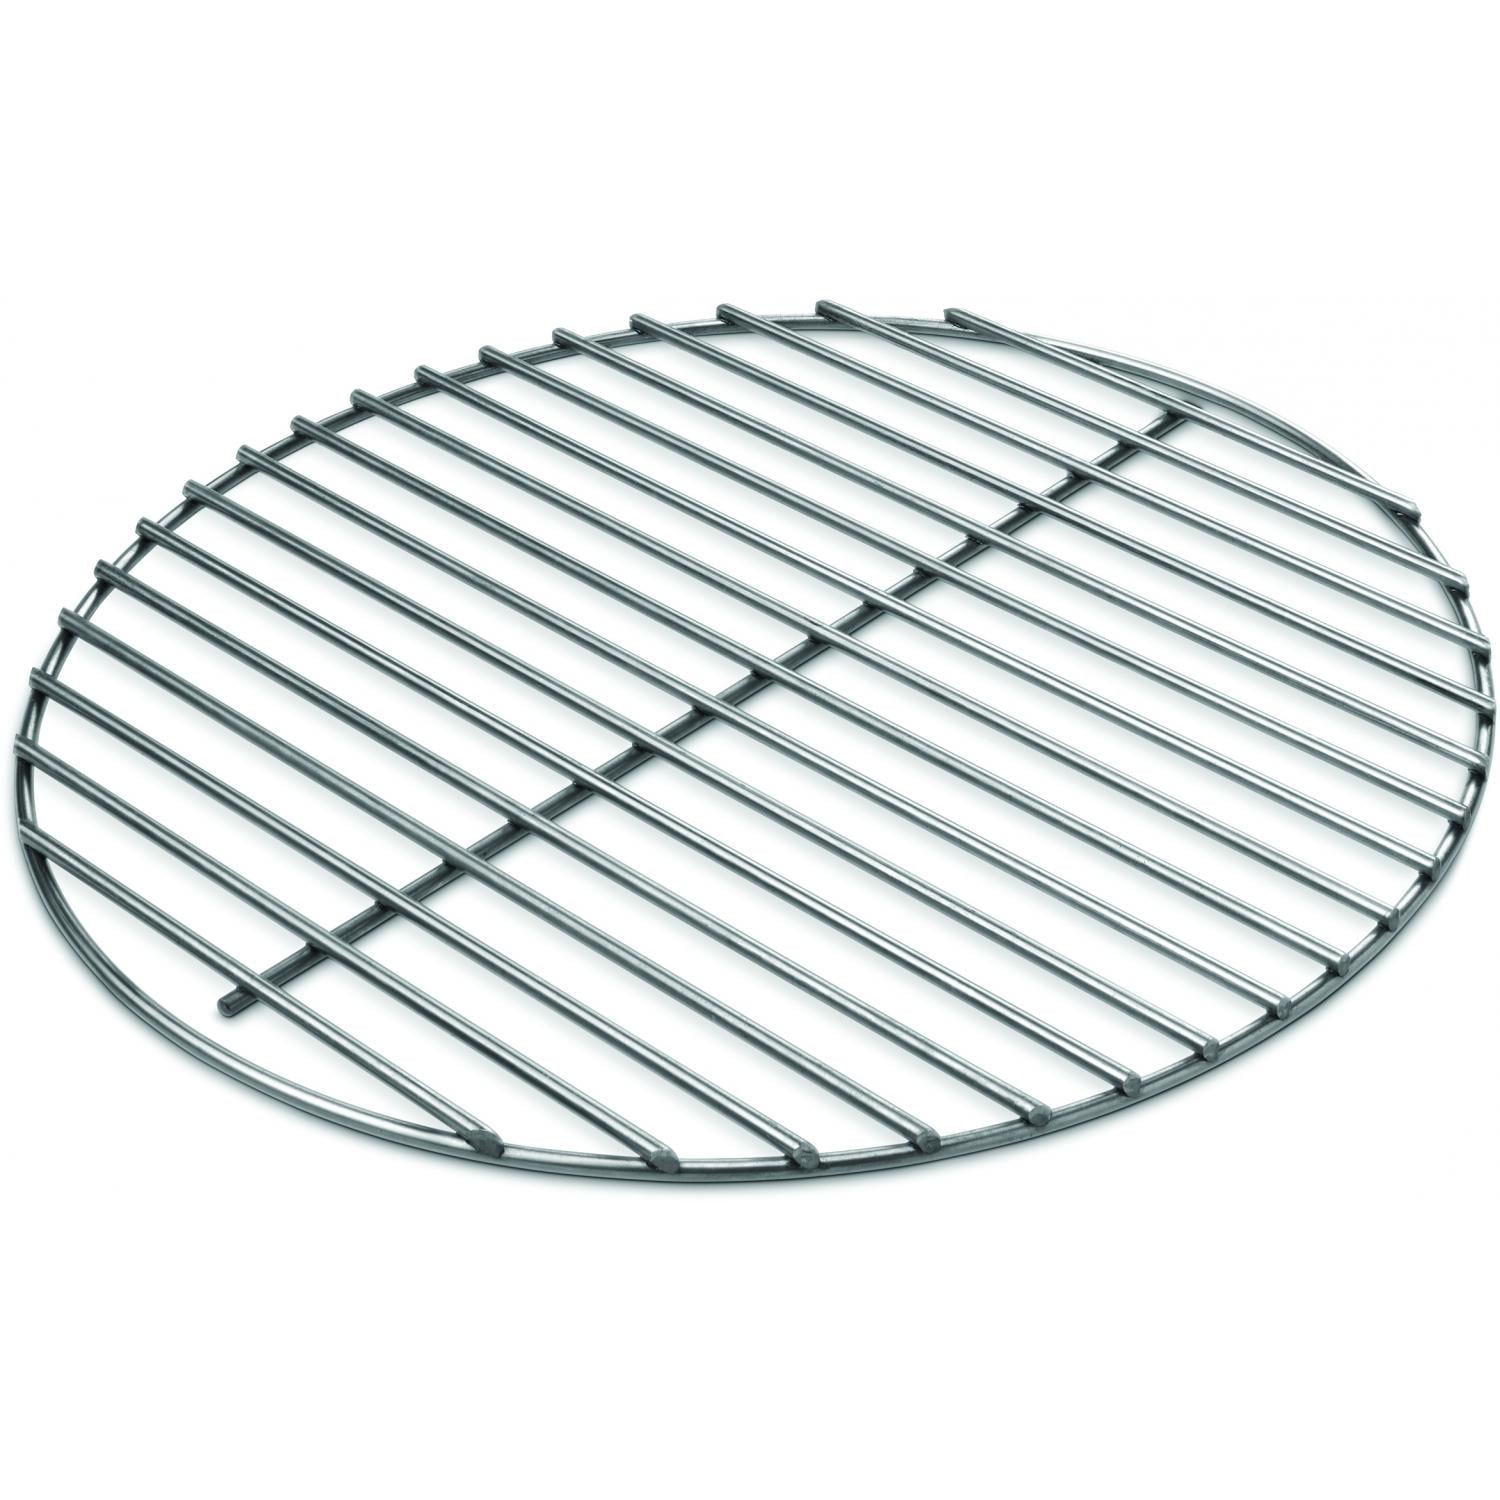 Weber 7440 Charcoal Grate For 18-Inch Kettle Grills - image 1 of 3